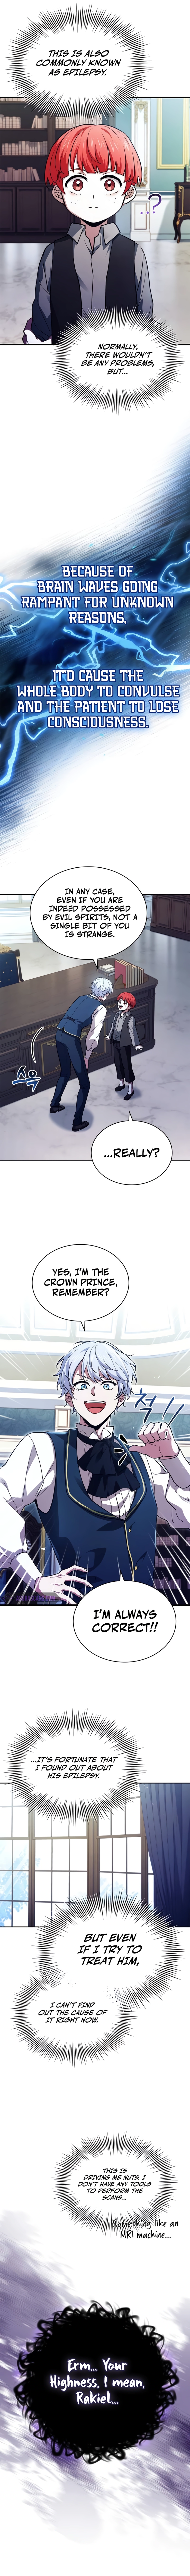 The Crown Prince That Sells Medicine, Chapter 16 image 06